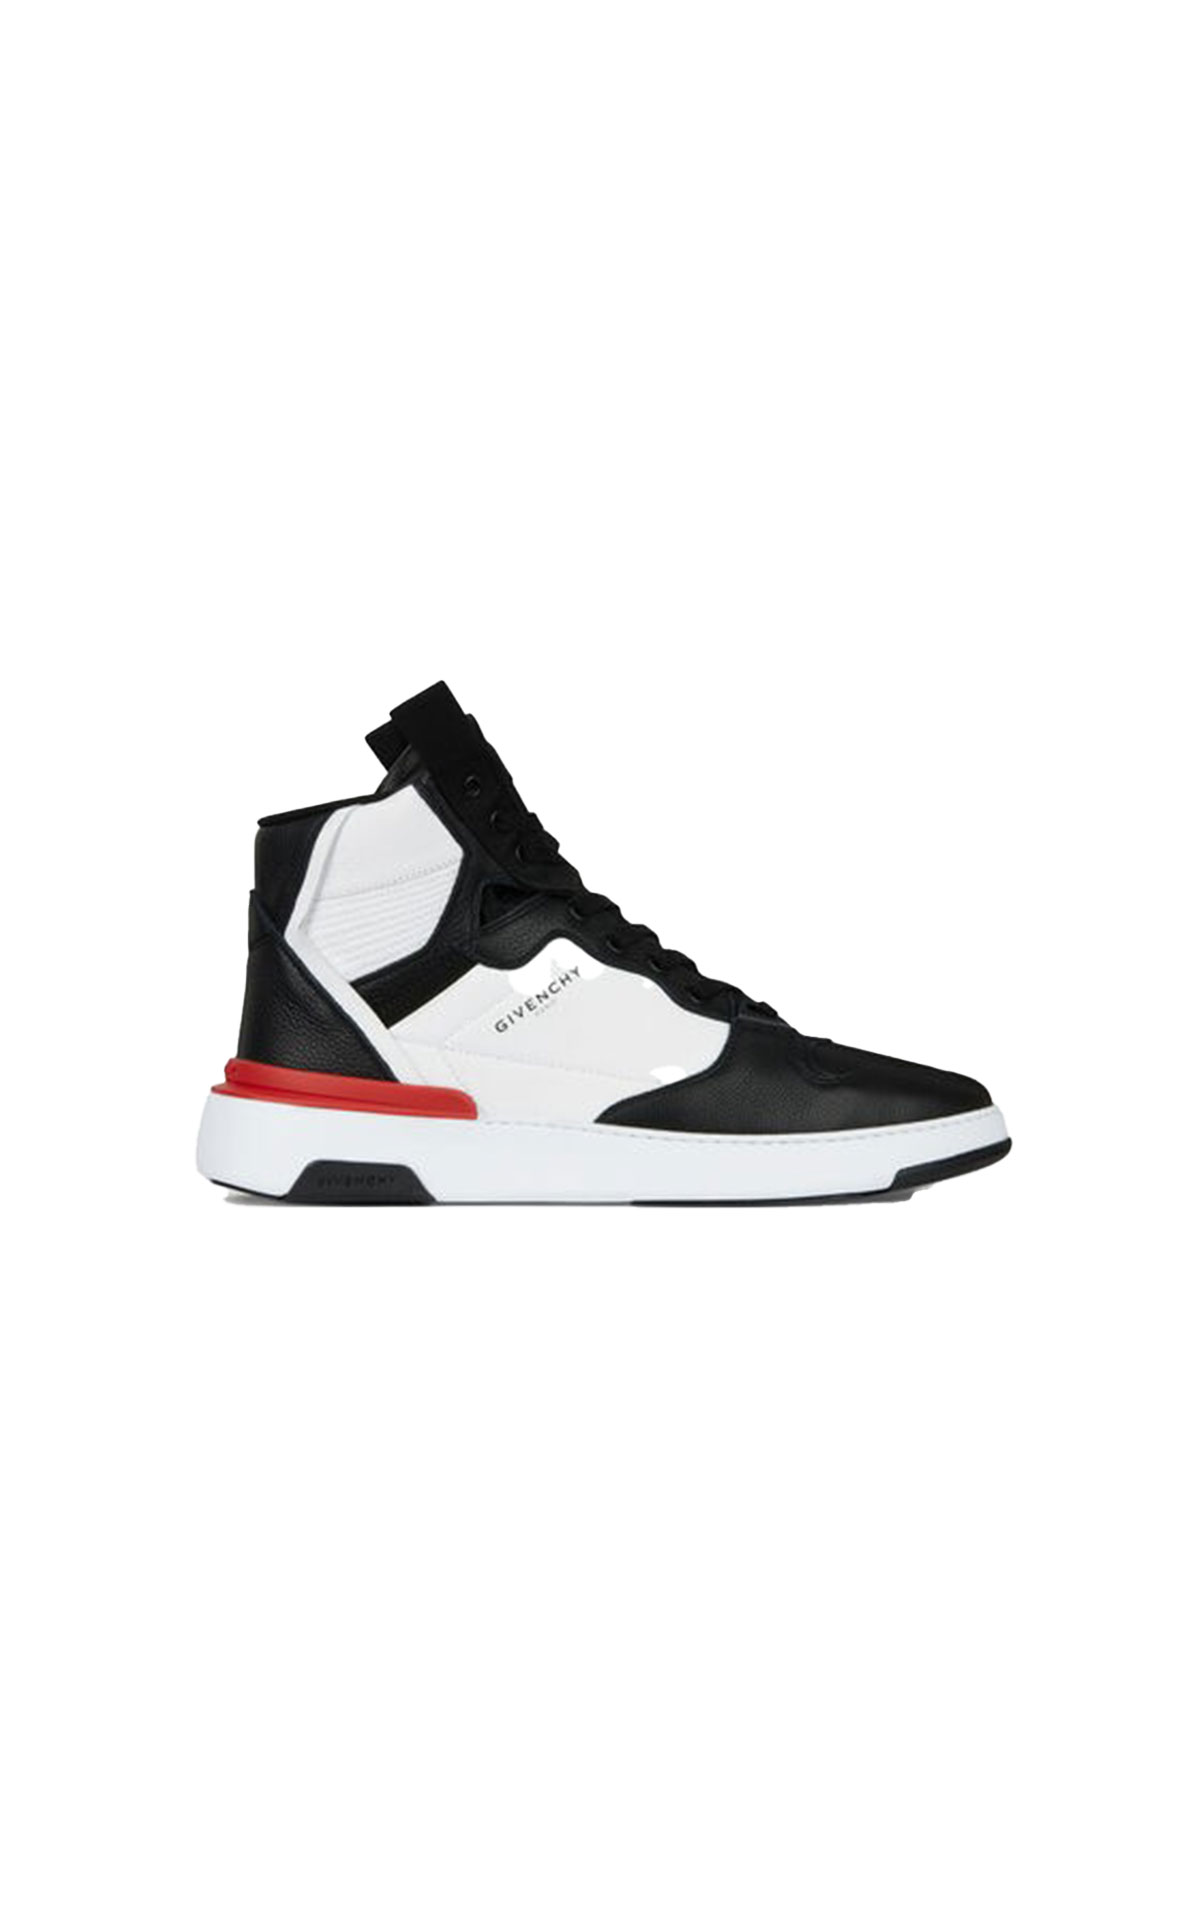 Givenchy Wing high sneaker from Bicester Village